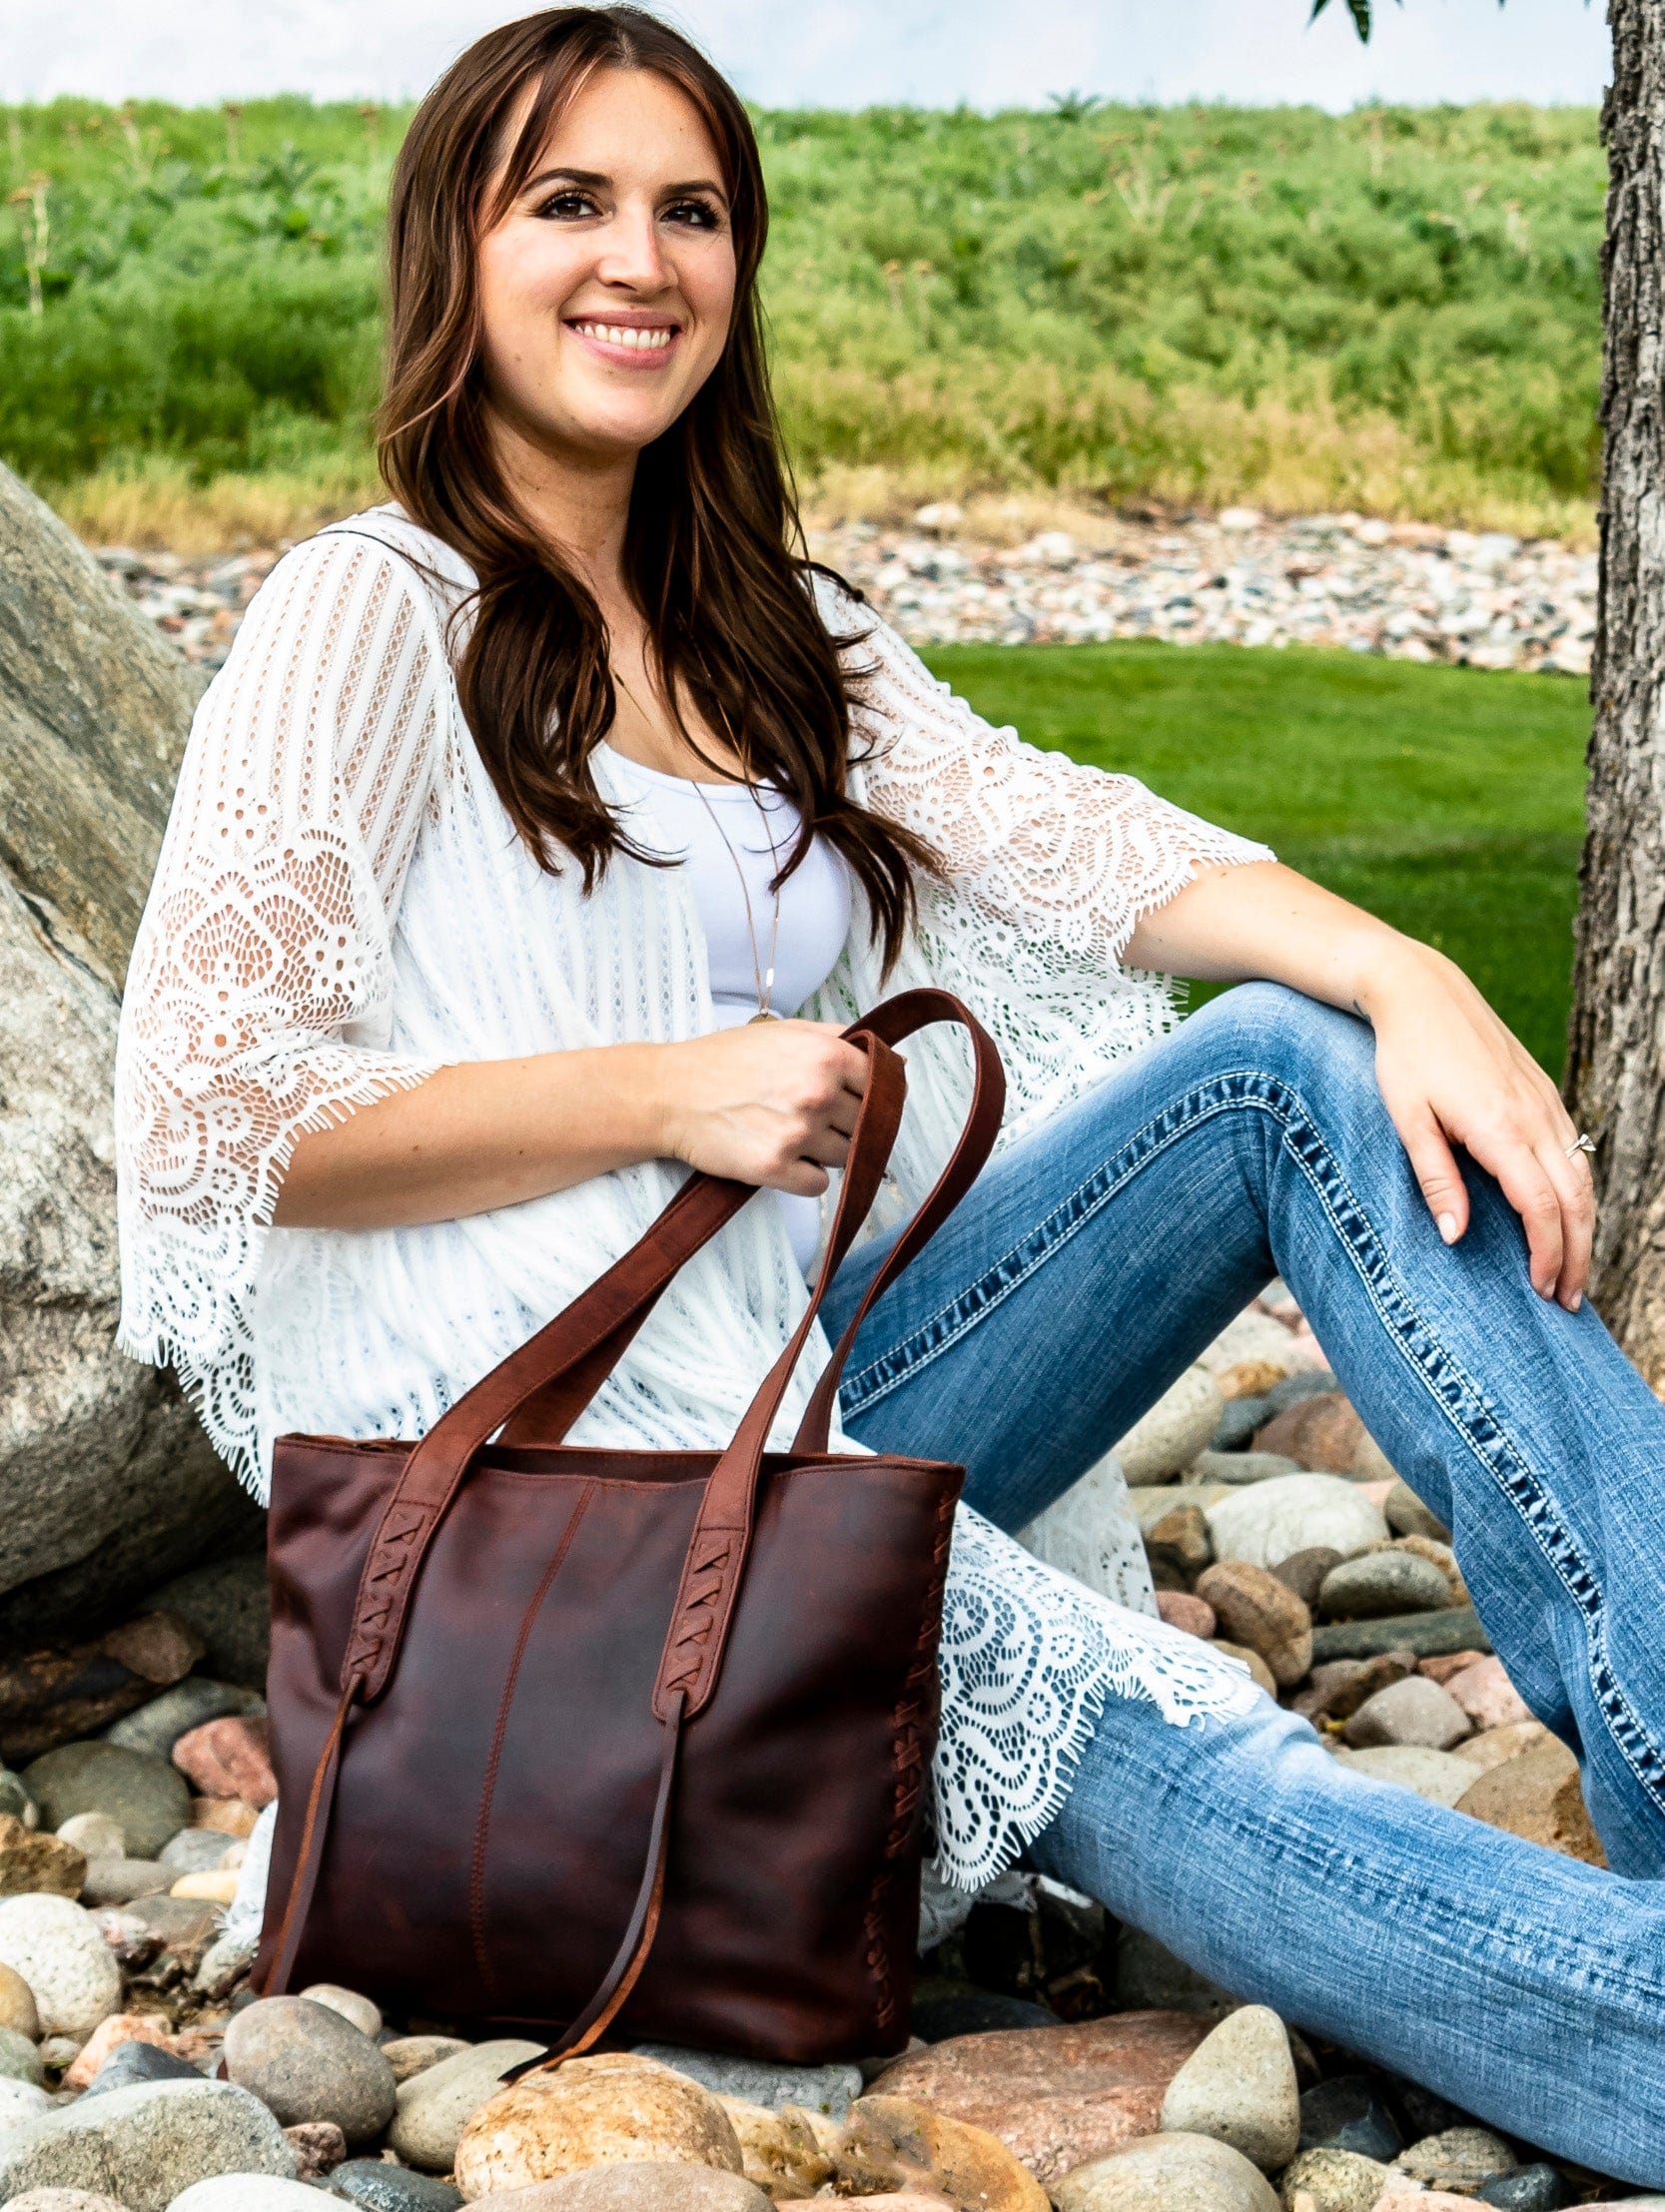 Concealed Carry Reagan Medium Leather Tote -  Lady Conceal -  Concealed Carry Purse -  Designer Luxury Leather Carry Handbag -  carry Handbag for gun carry -  Unique Tote gun Handbag -  designer backpack purse -  designer purse sale -  designer purse sales -  womens designer purse sale -  Peyton Leather Tote -  designer lady purse concealed carry gun Handbag -   concealed carry Handbag for woman-  Easy Conceal Carry and Draw Purse -